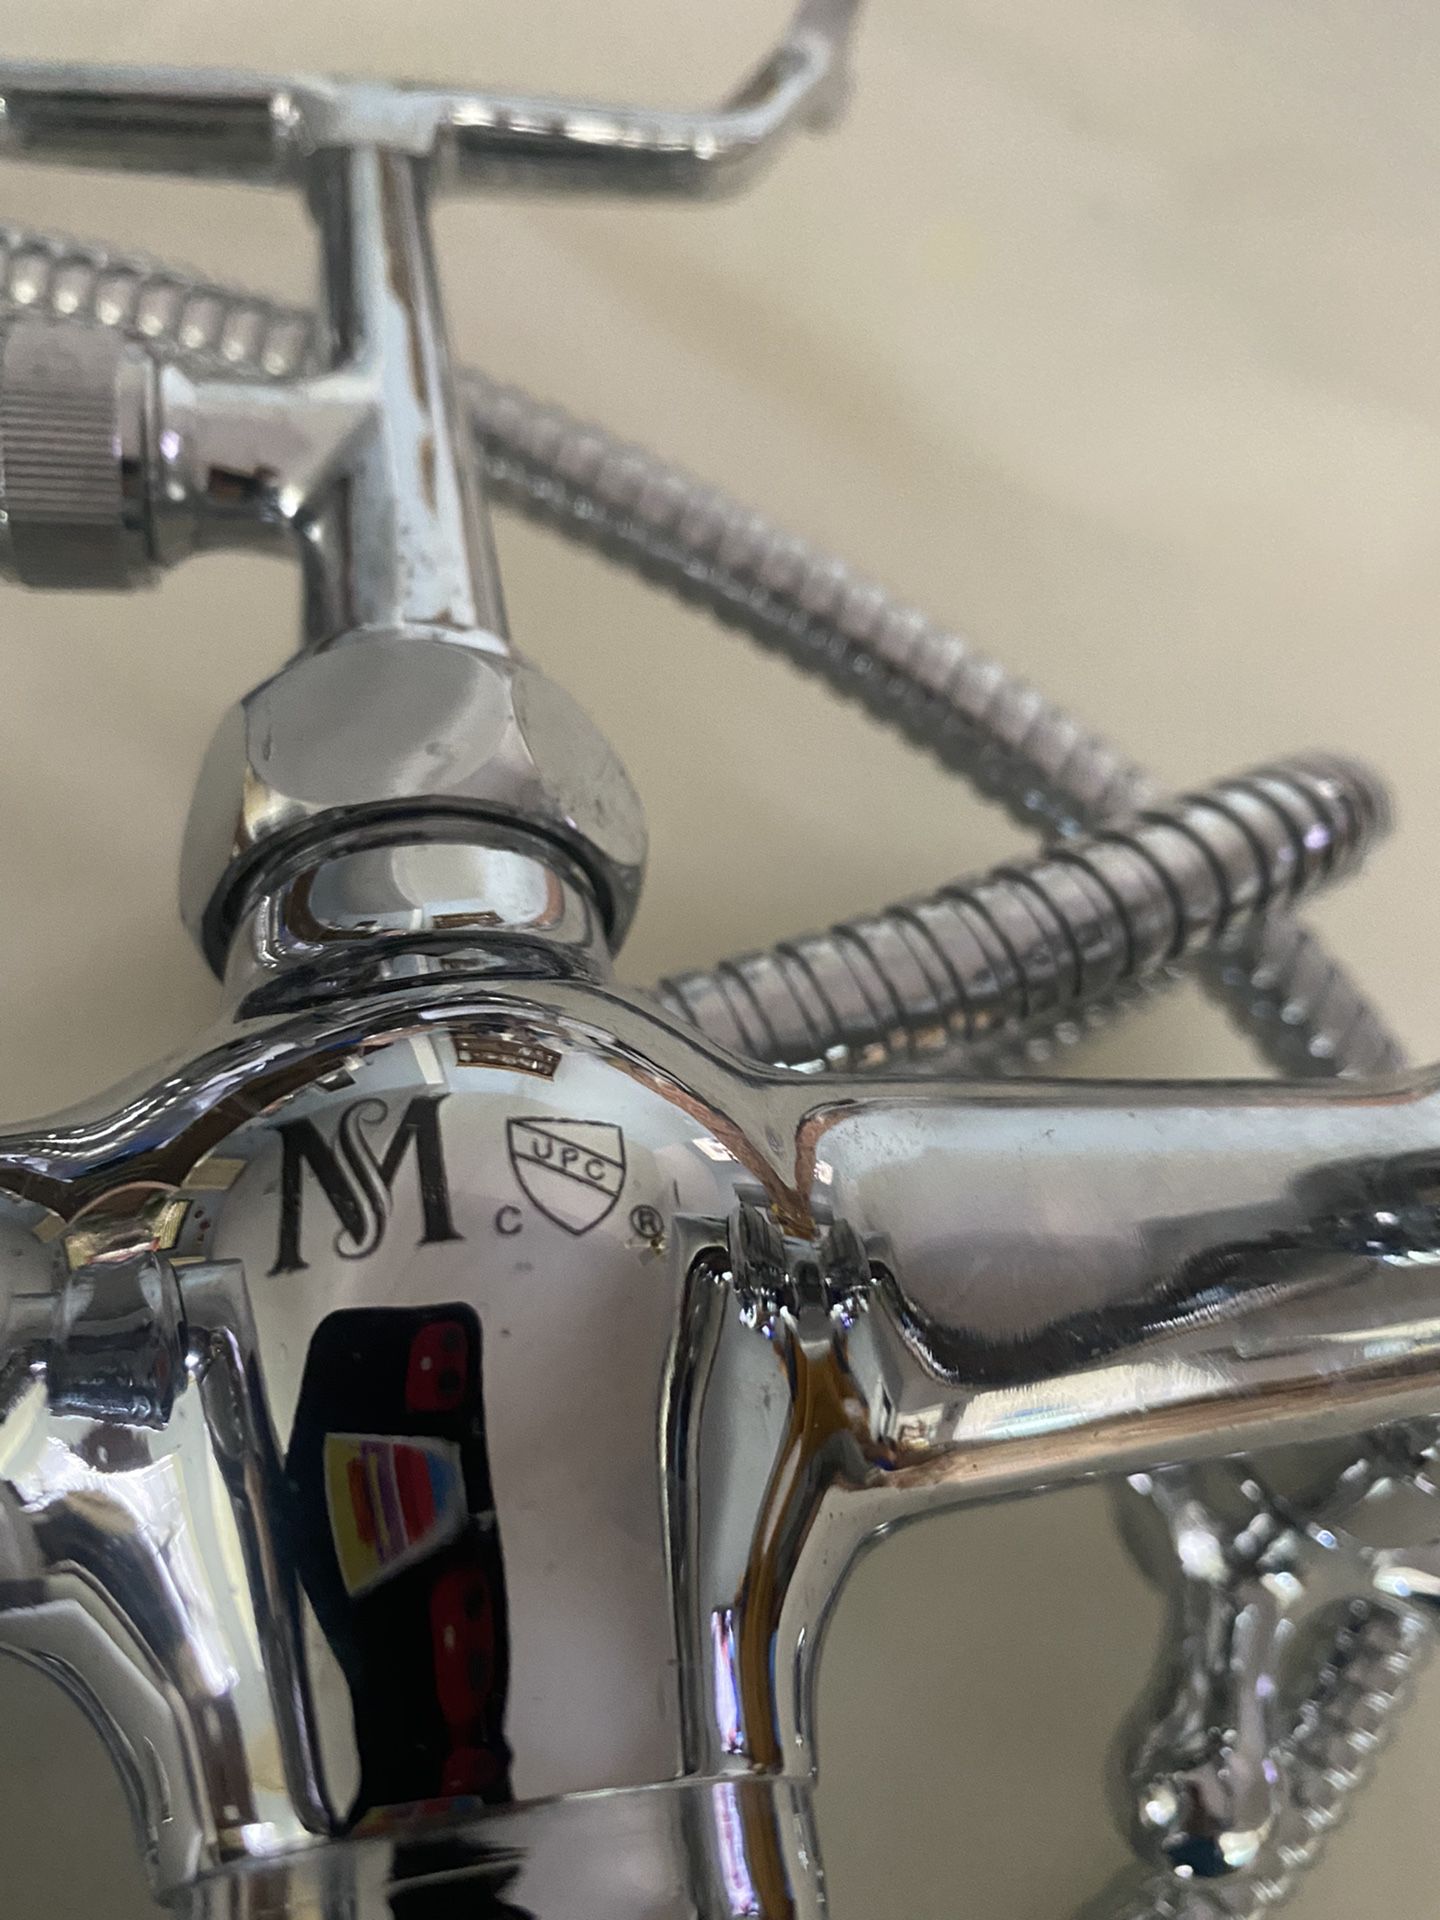 “M” Designer Chrome MOUNT FAUCET SET as new it is over $600. New… asking $350. Obo today 